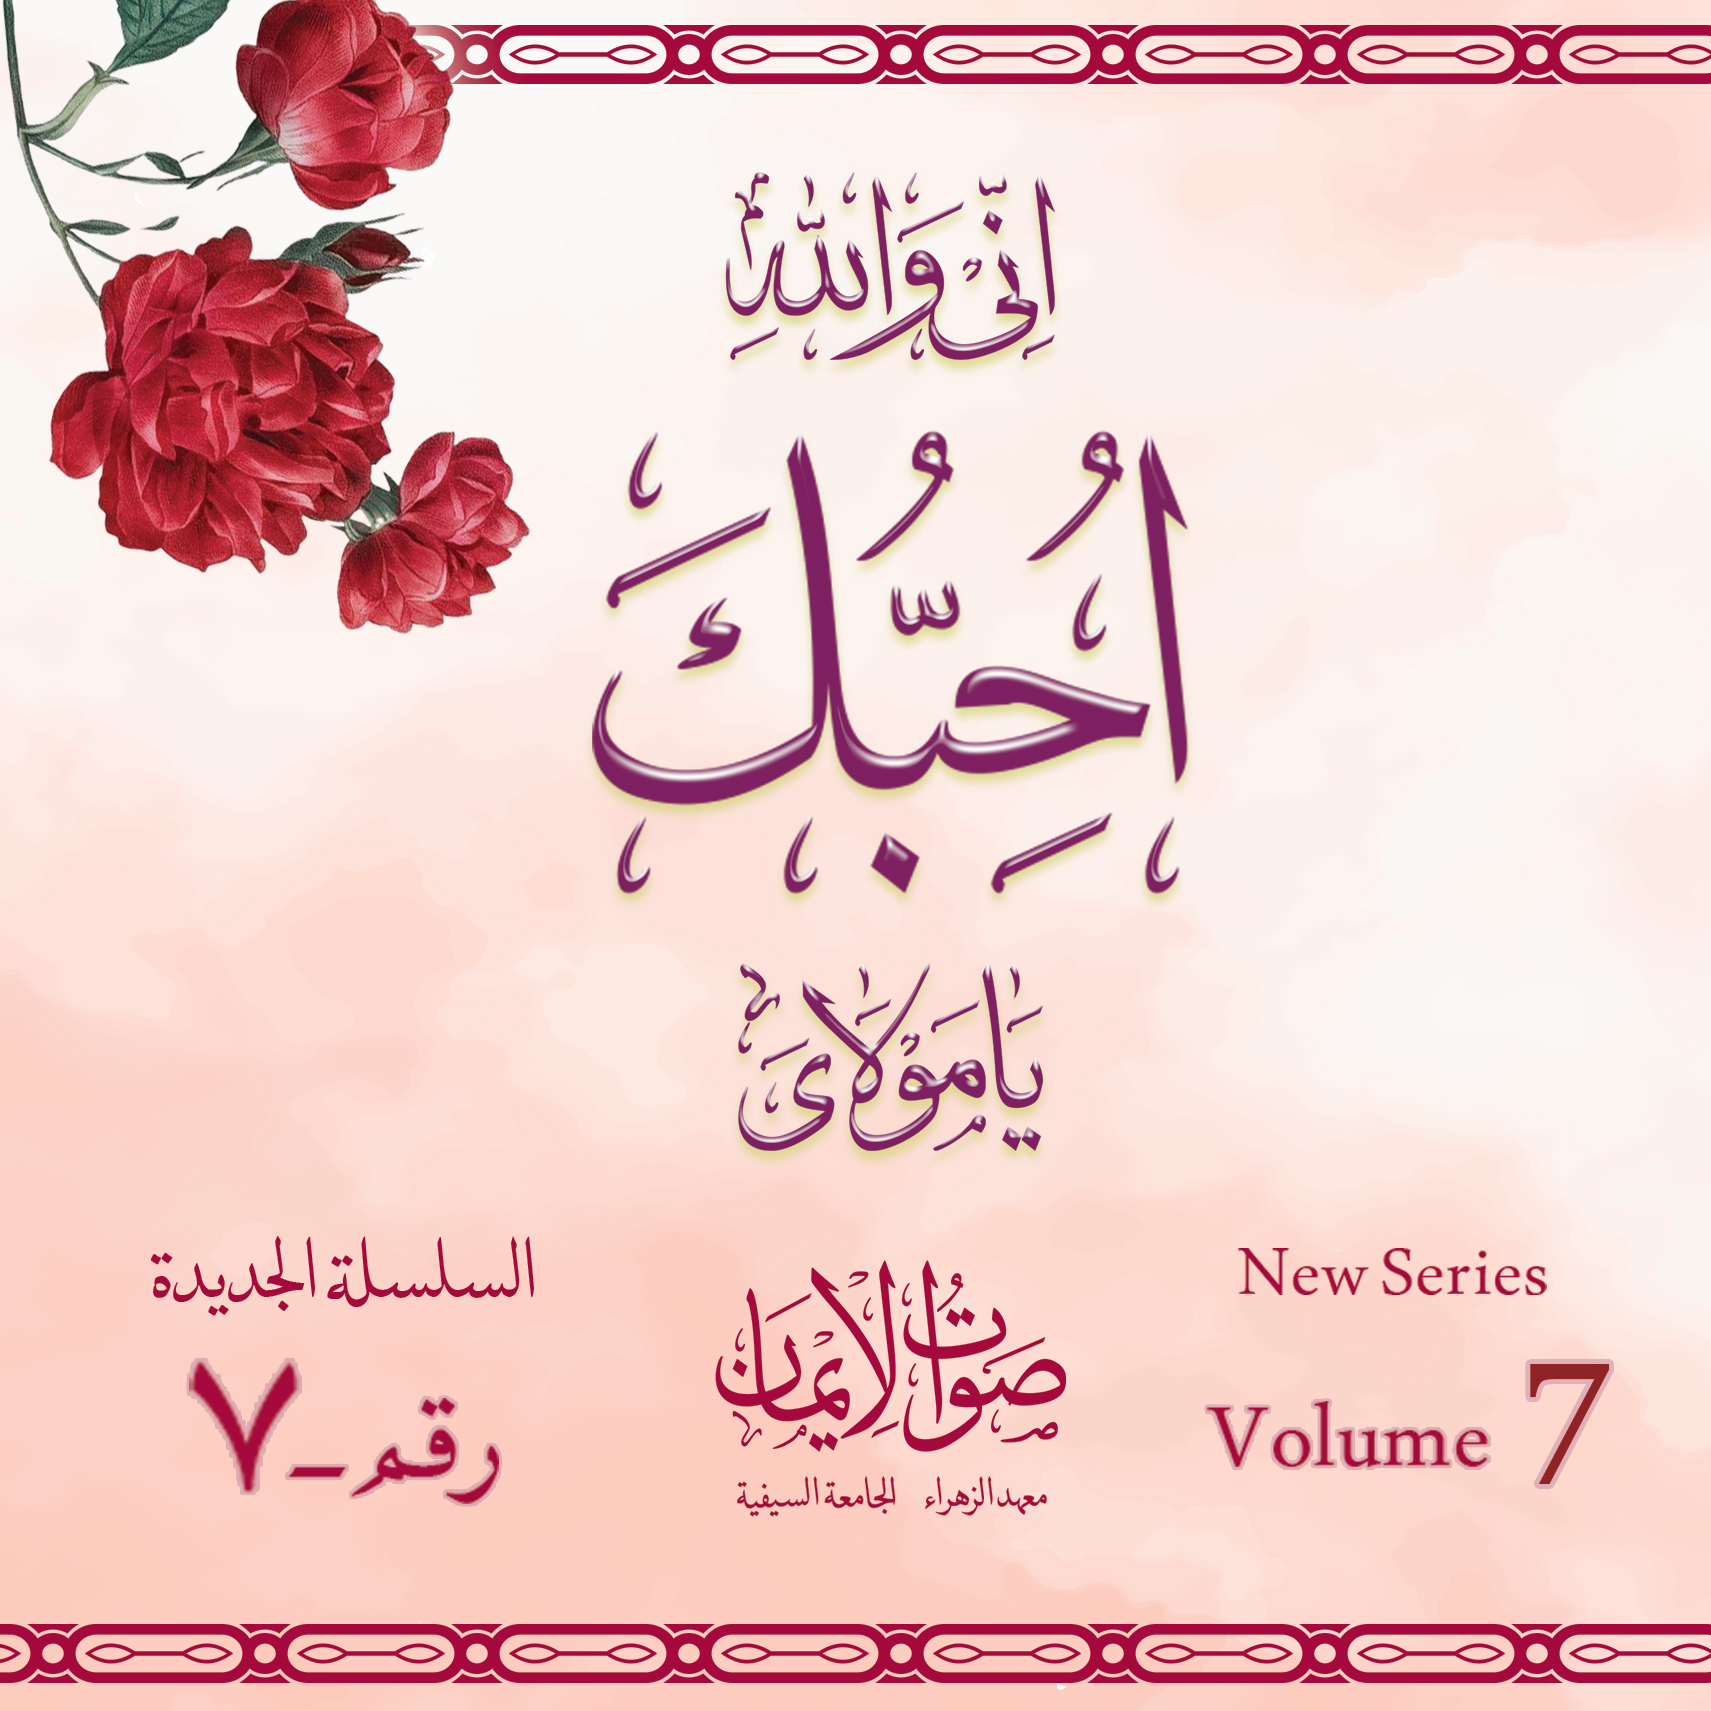 Volume Seven of Sautuliman New Series